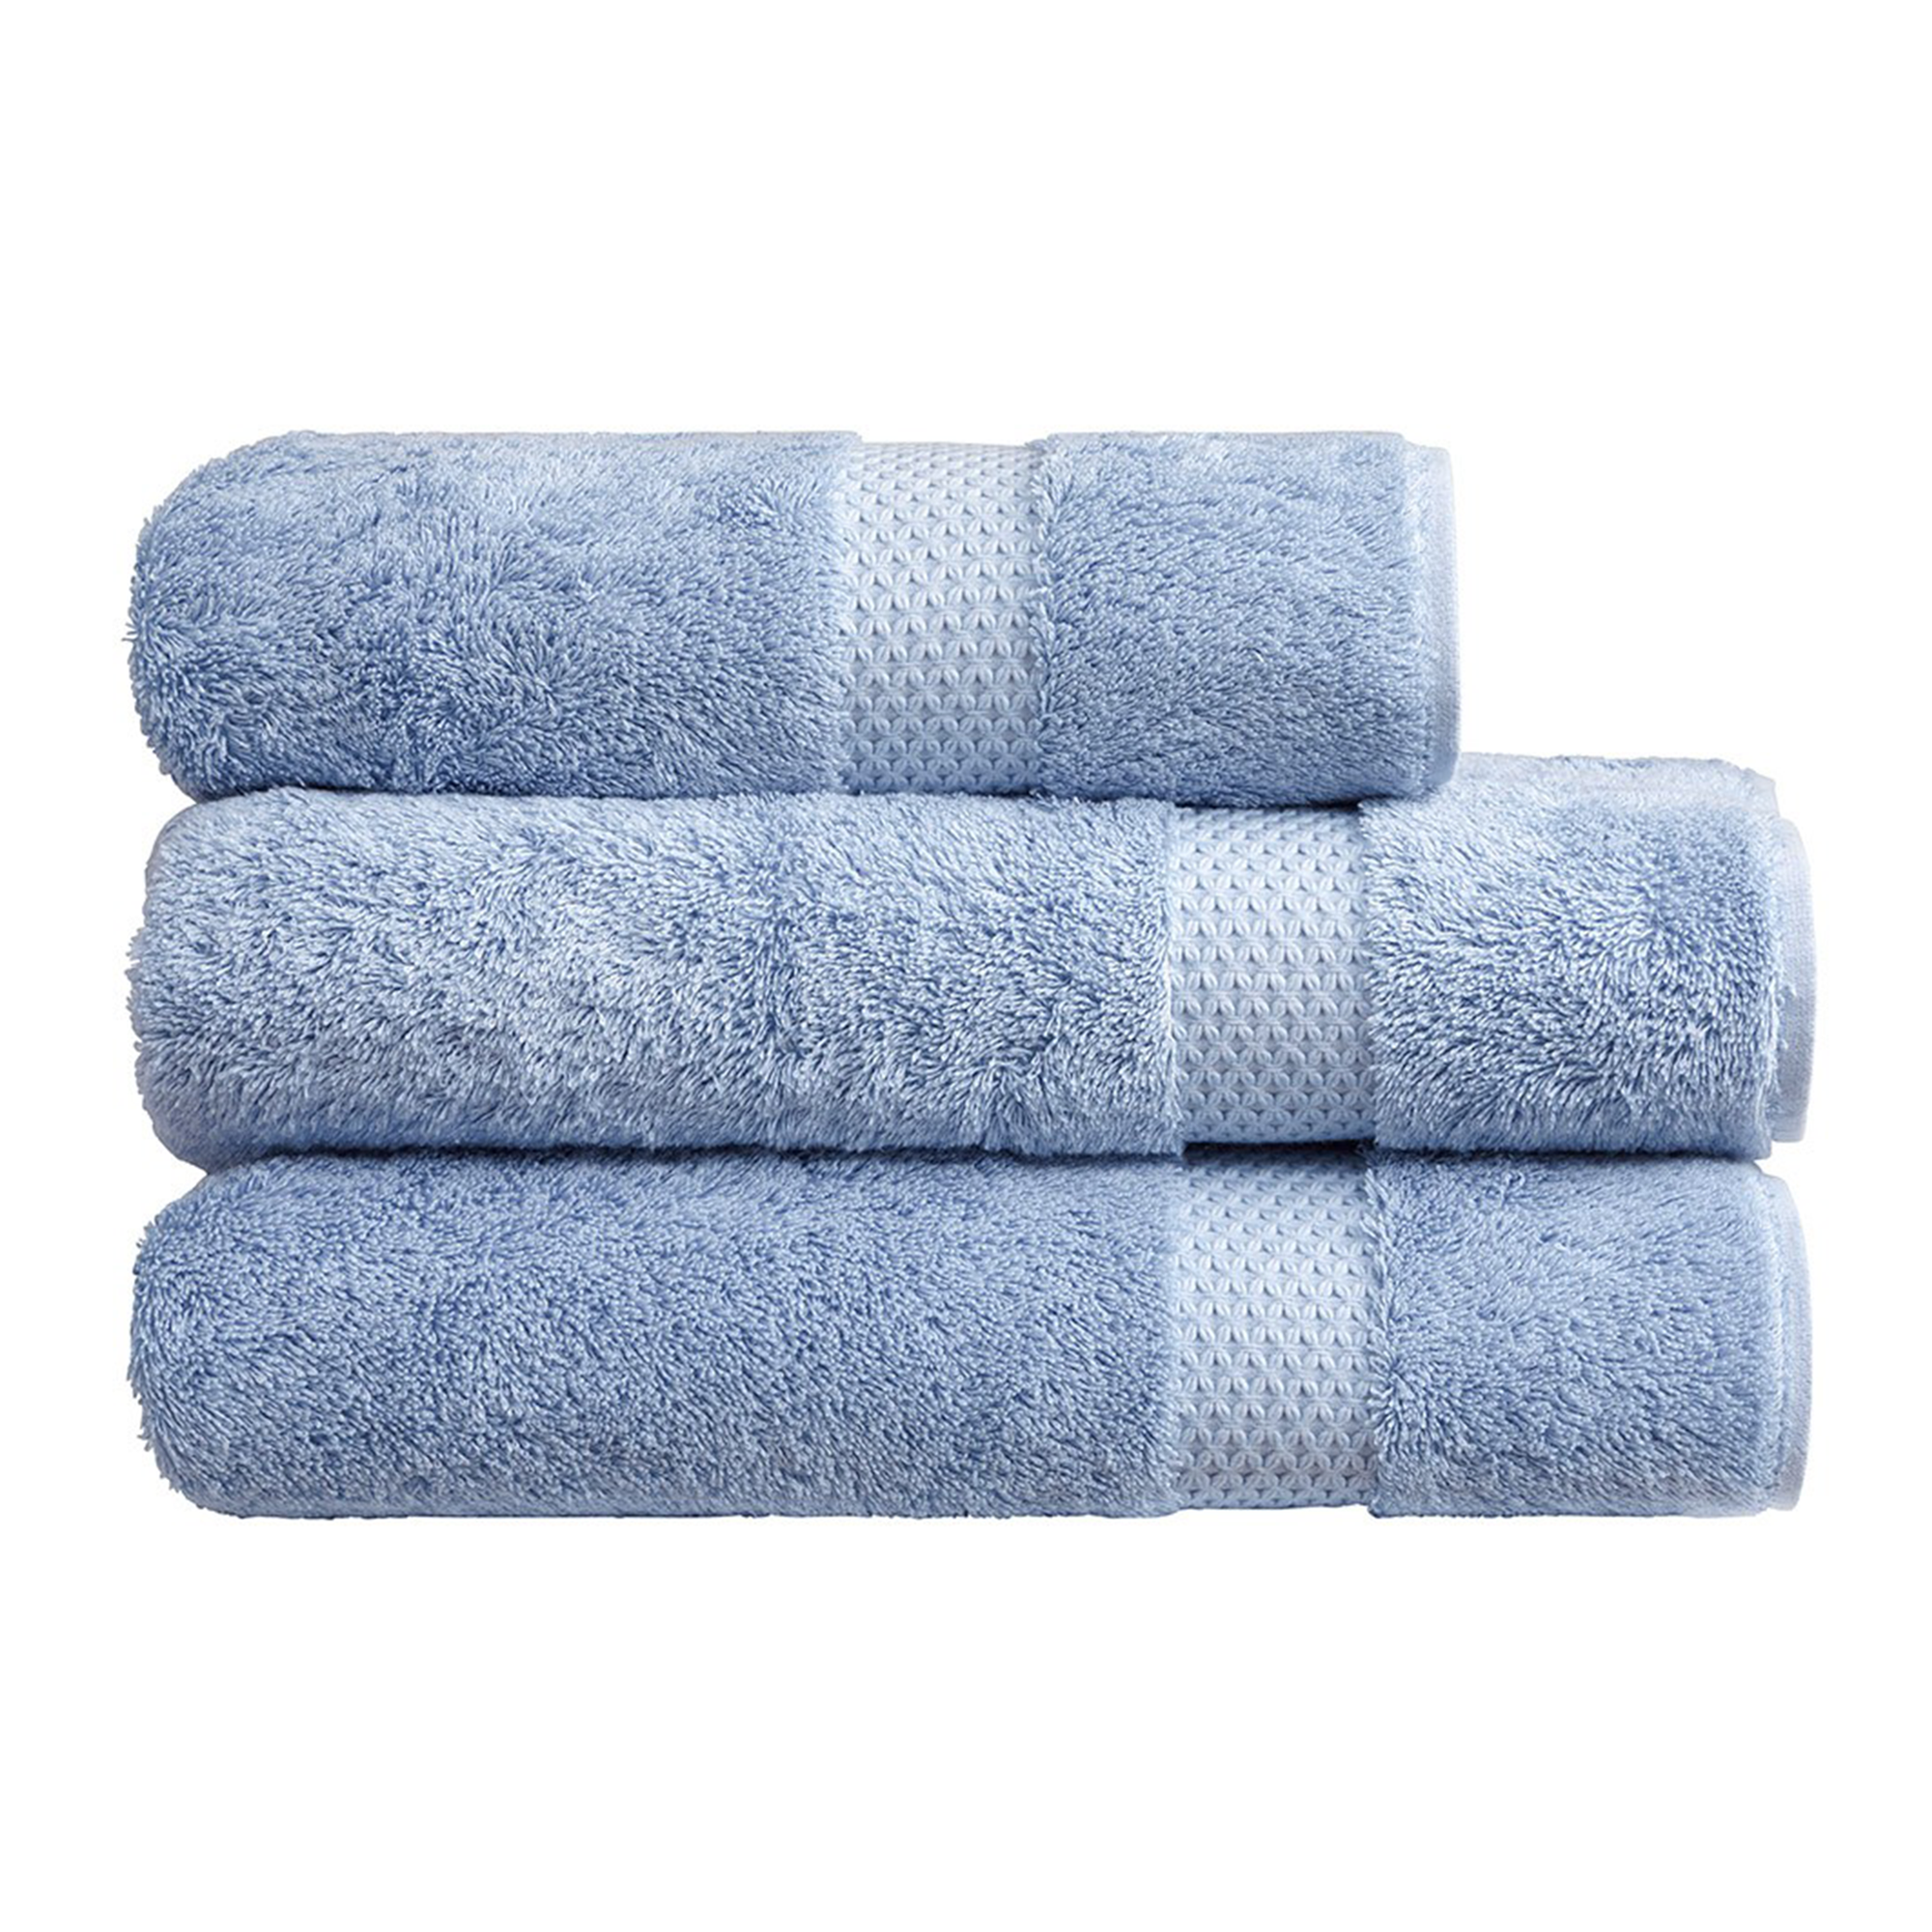 Silo Image of Yves Delorme Etoile Bath Towels in Azure Color